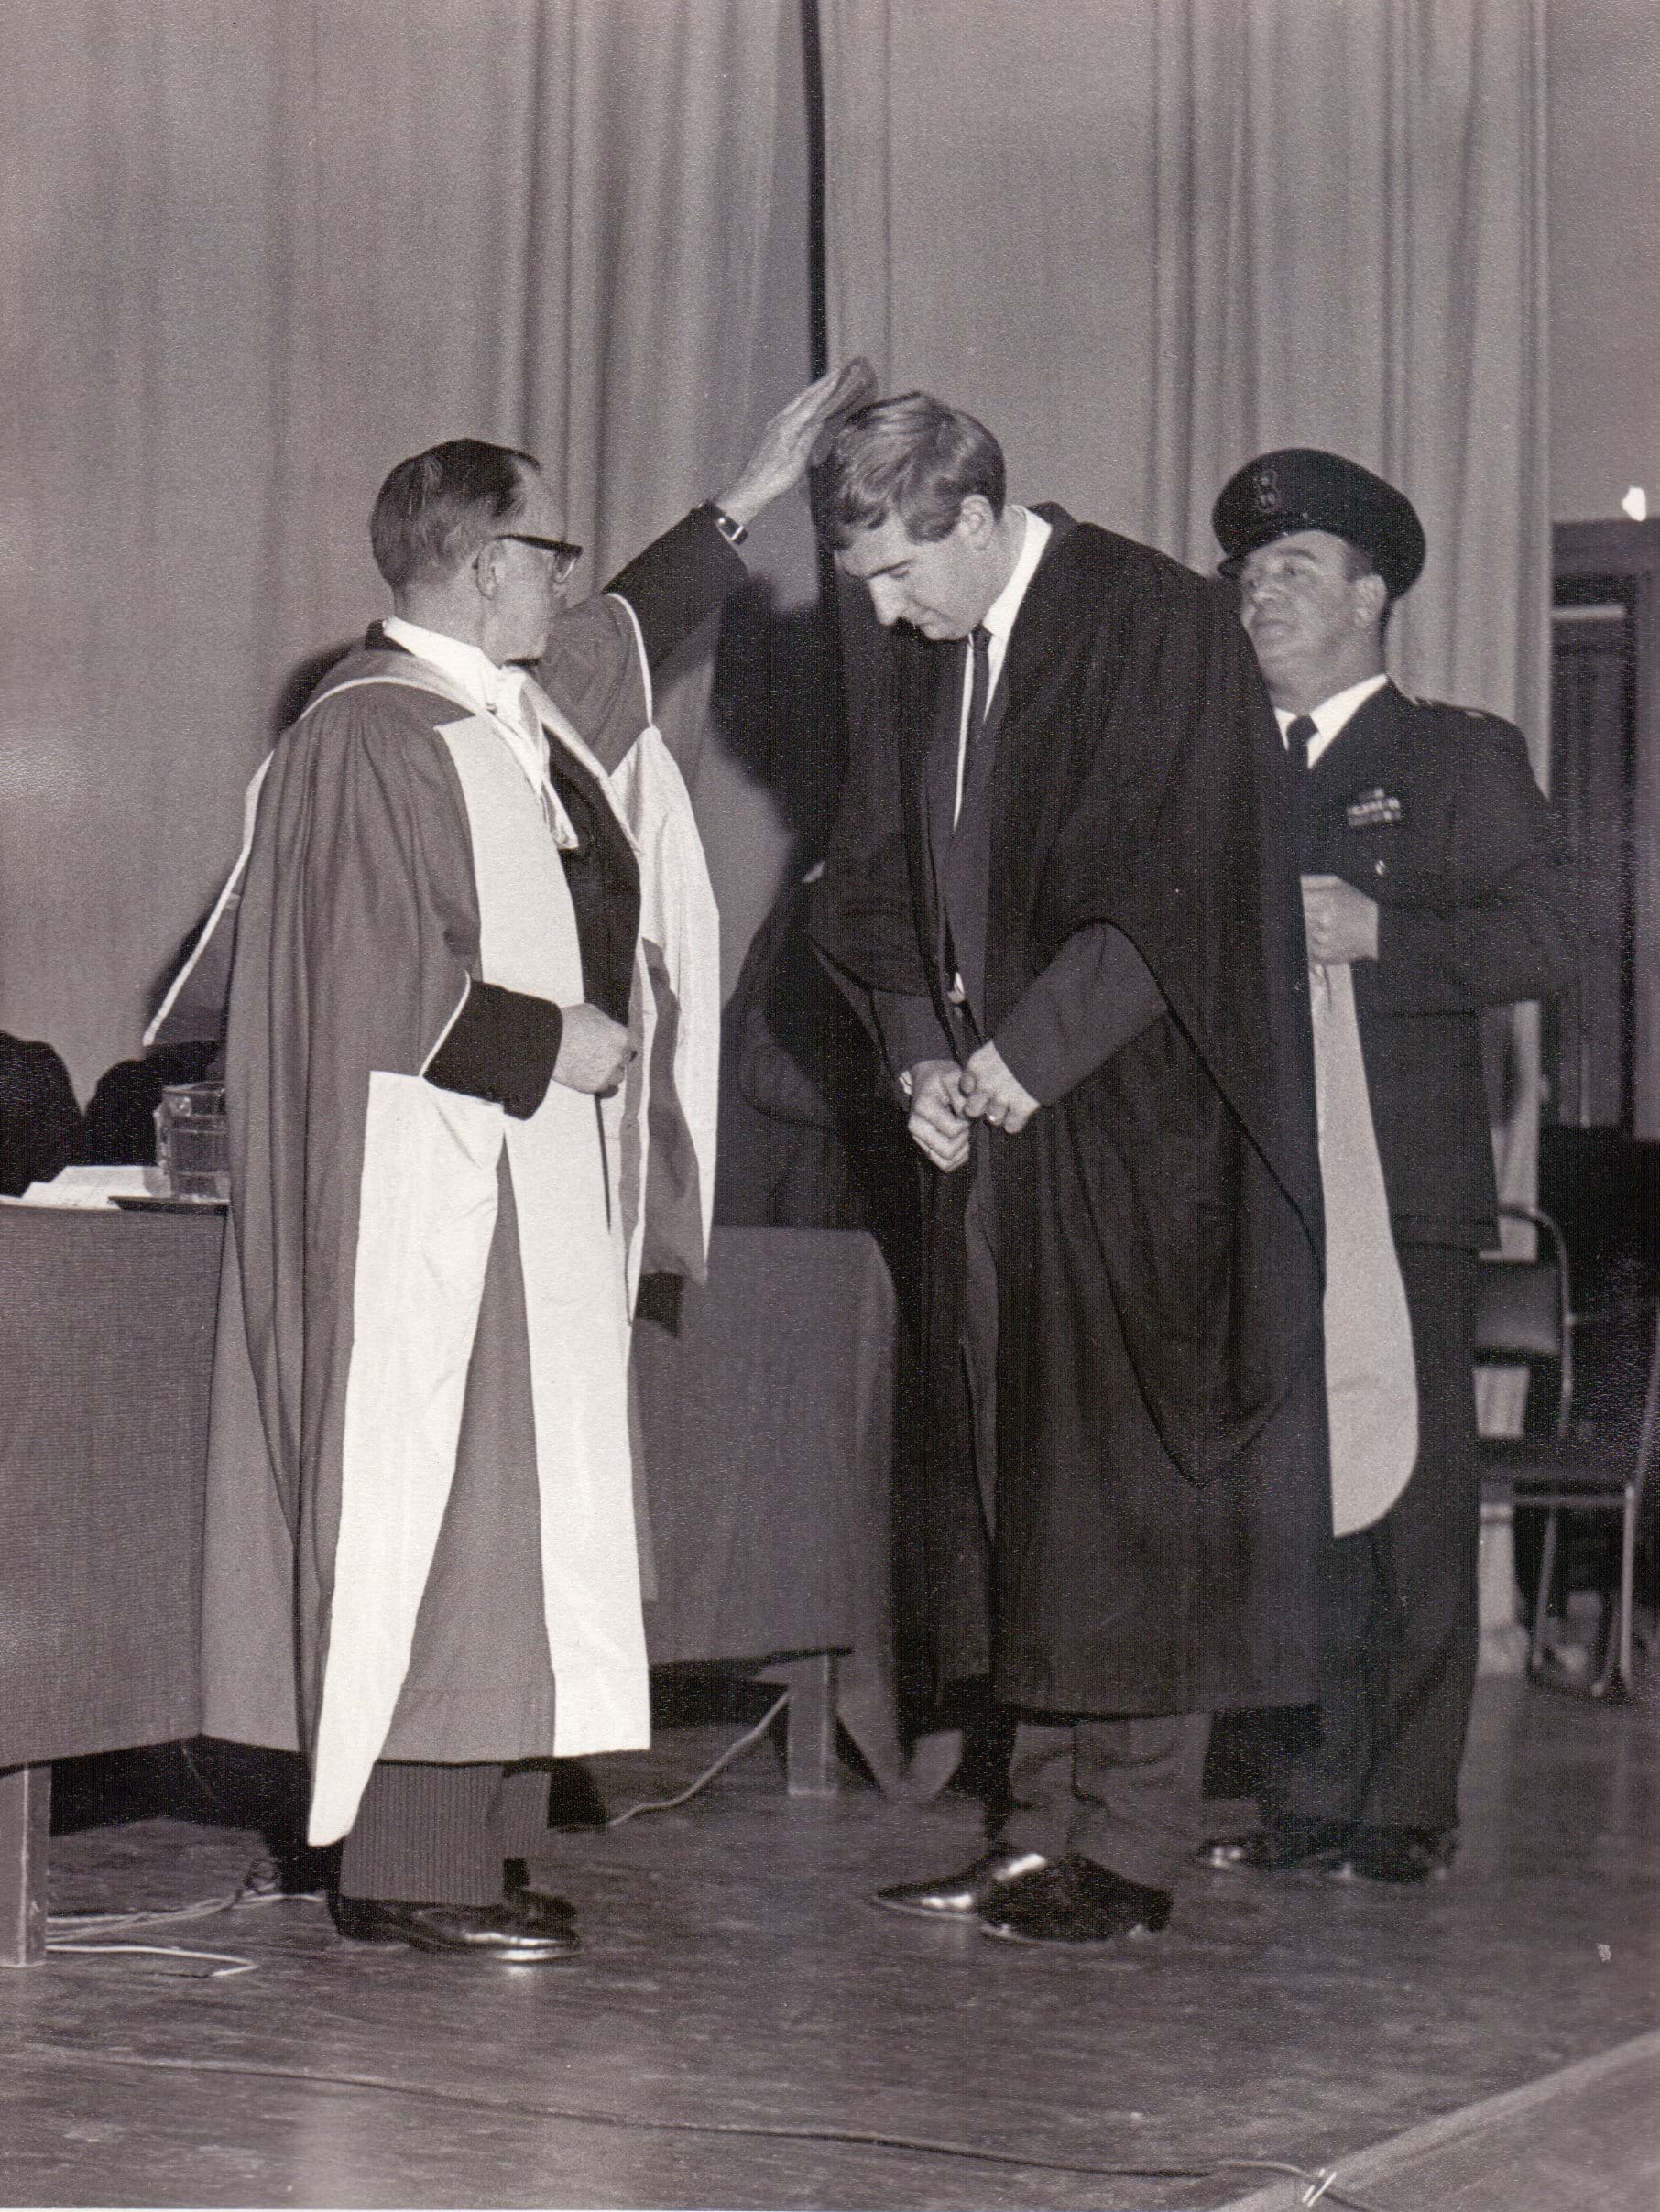 Dundee Technical College Graduation showing a Graduand being capped 1967